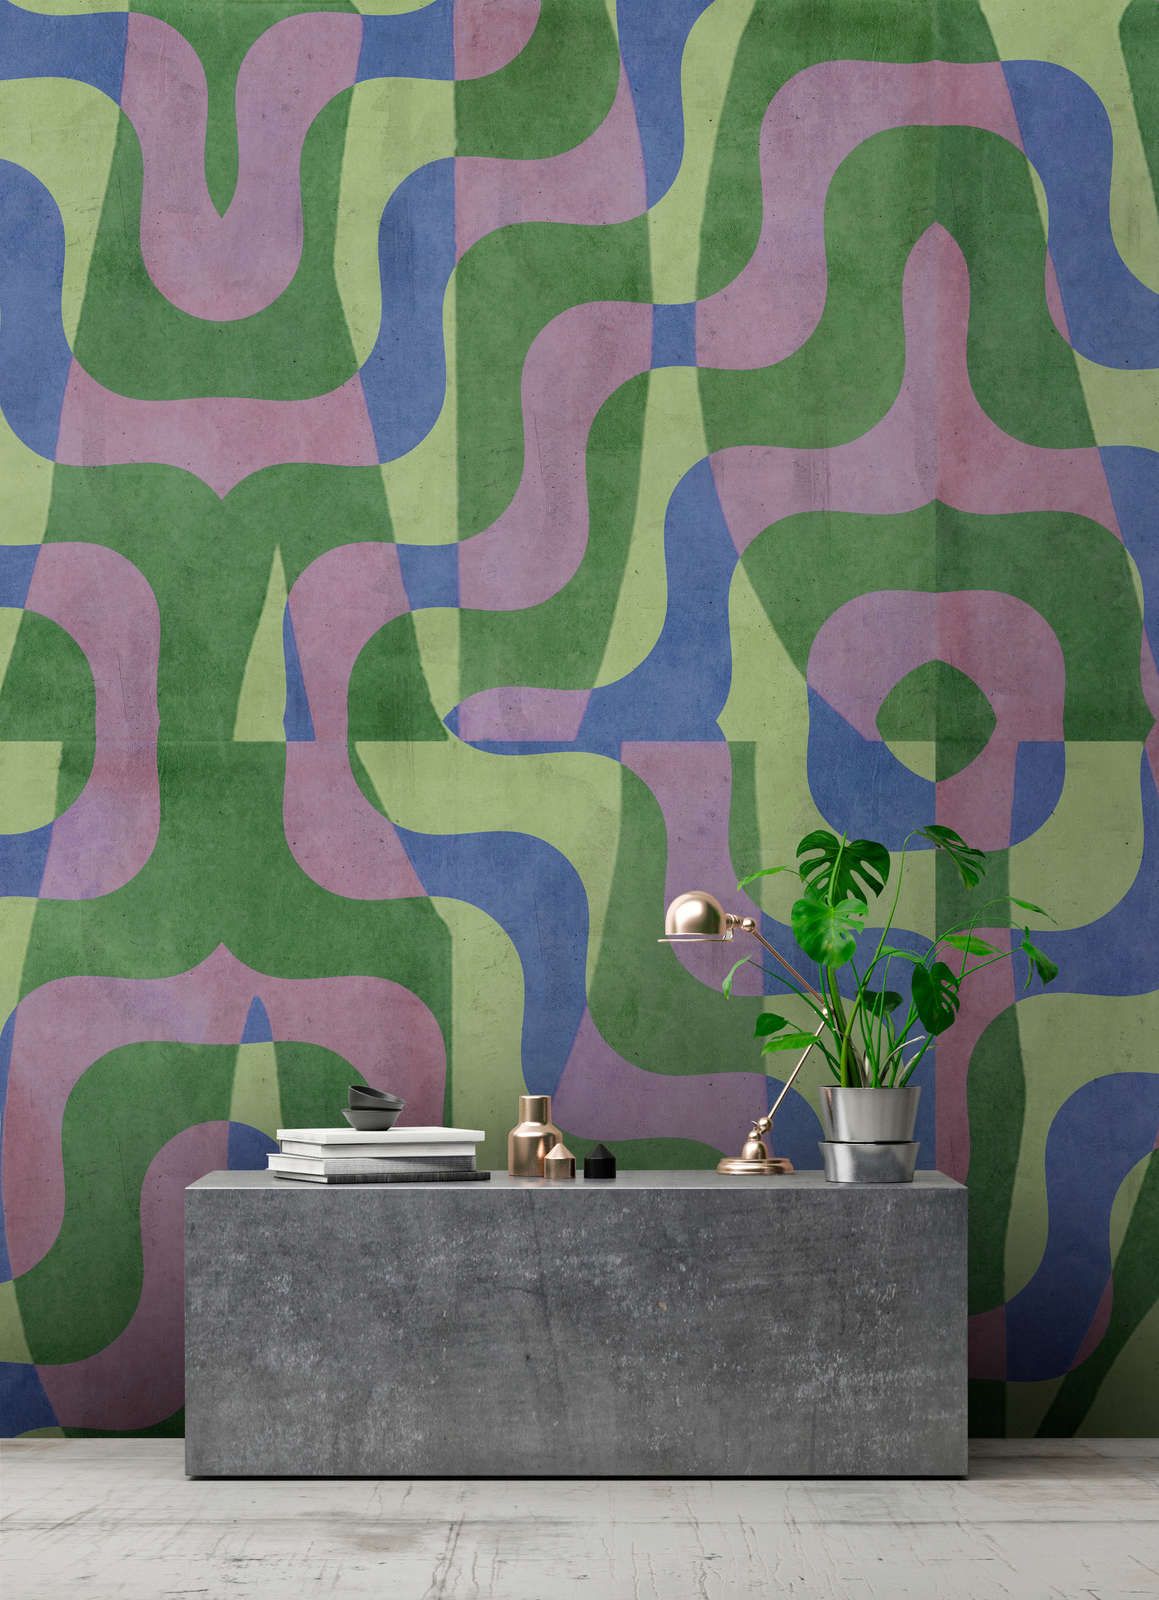             Photo wallpaper »viola« - Abstract retro pattern in front of concrete plaster look - Green, blue, purple | Smooth, slightly pearlescent non-woven fabric
        